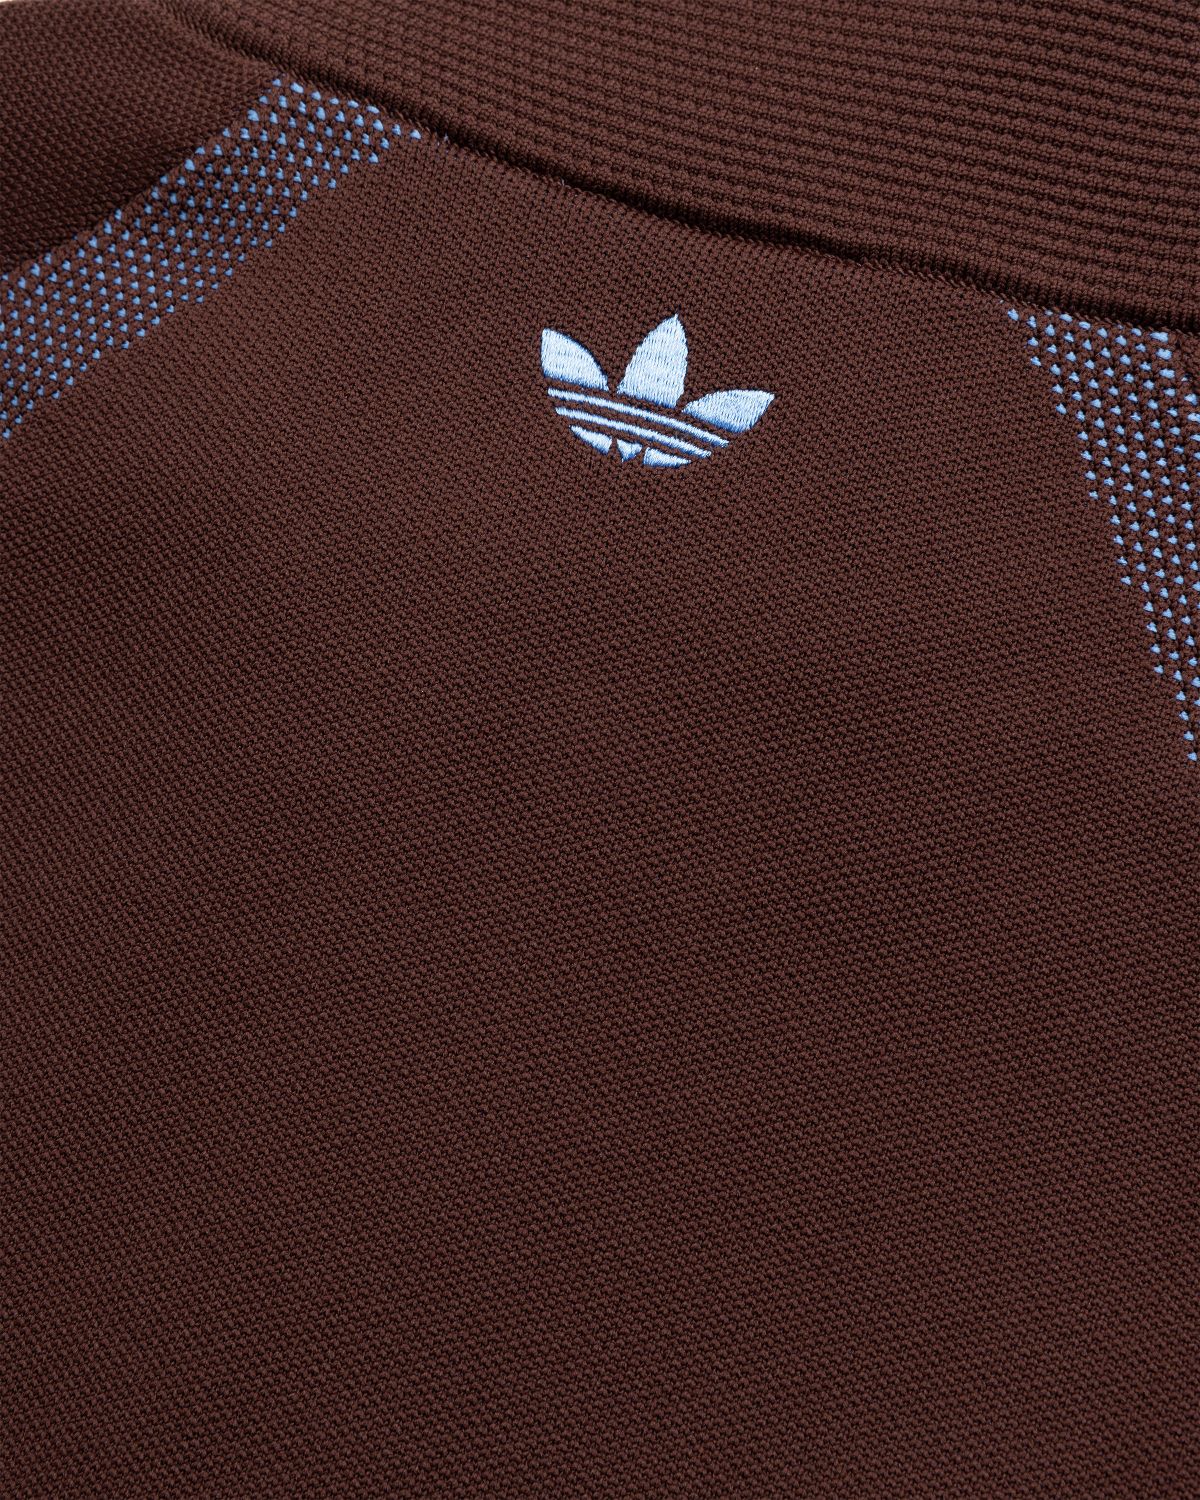 Adidas x Wales Bonner – Knit Track Top Mystery Brown - Tops - Brown - Image 7